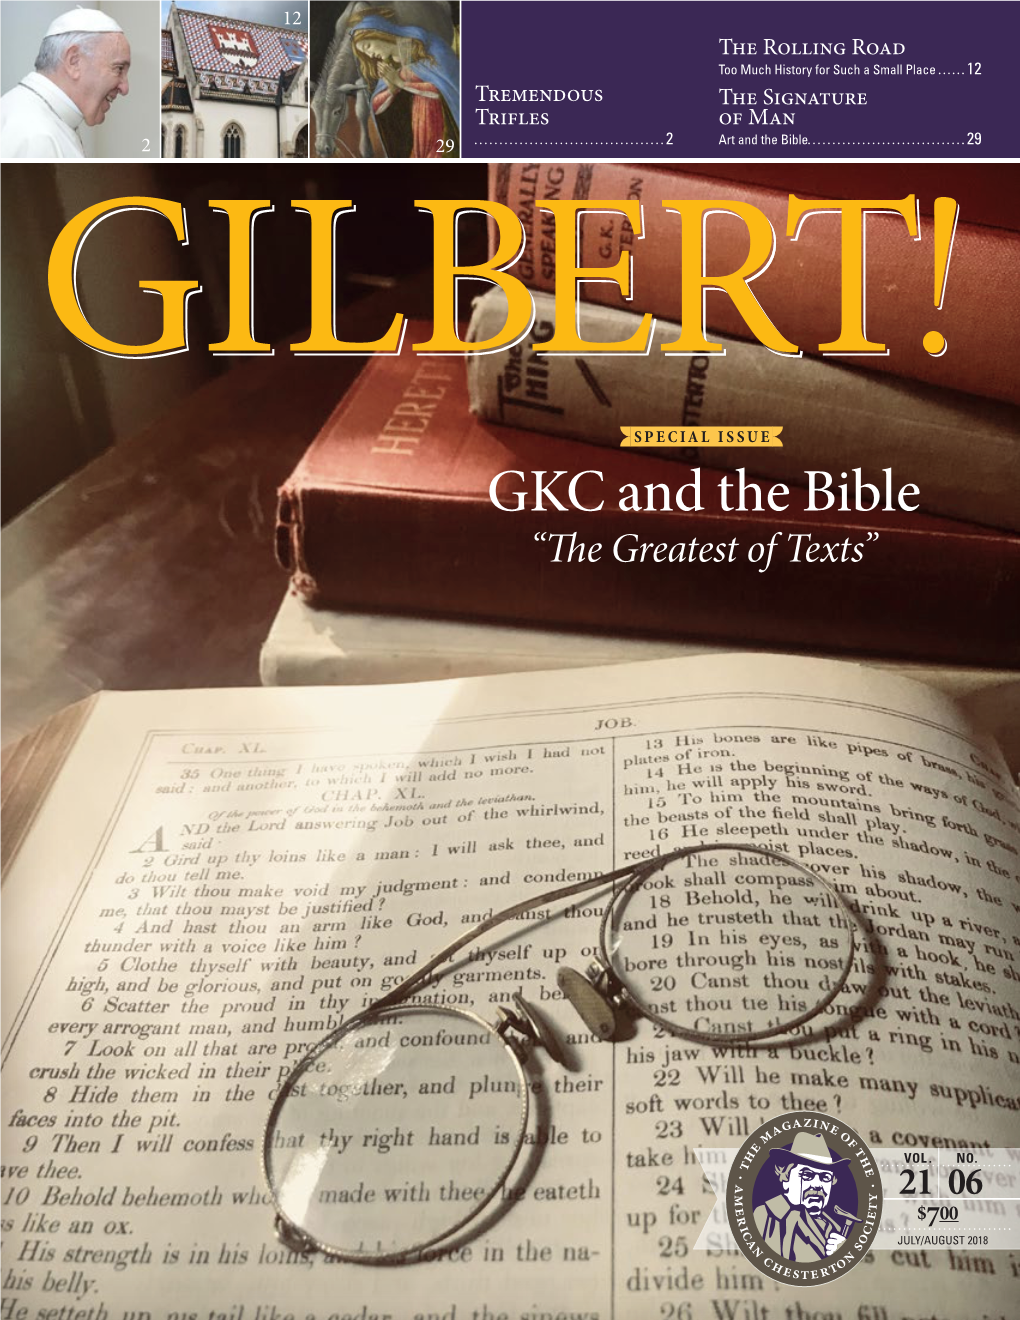 GKC and the Bible “The Greatest of Texts”